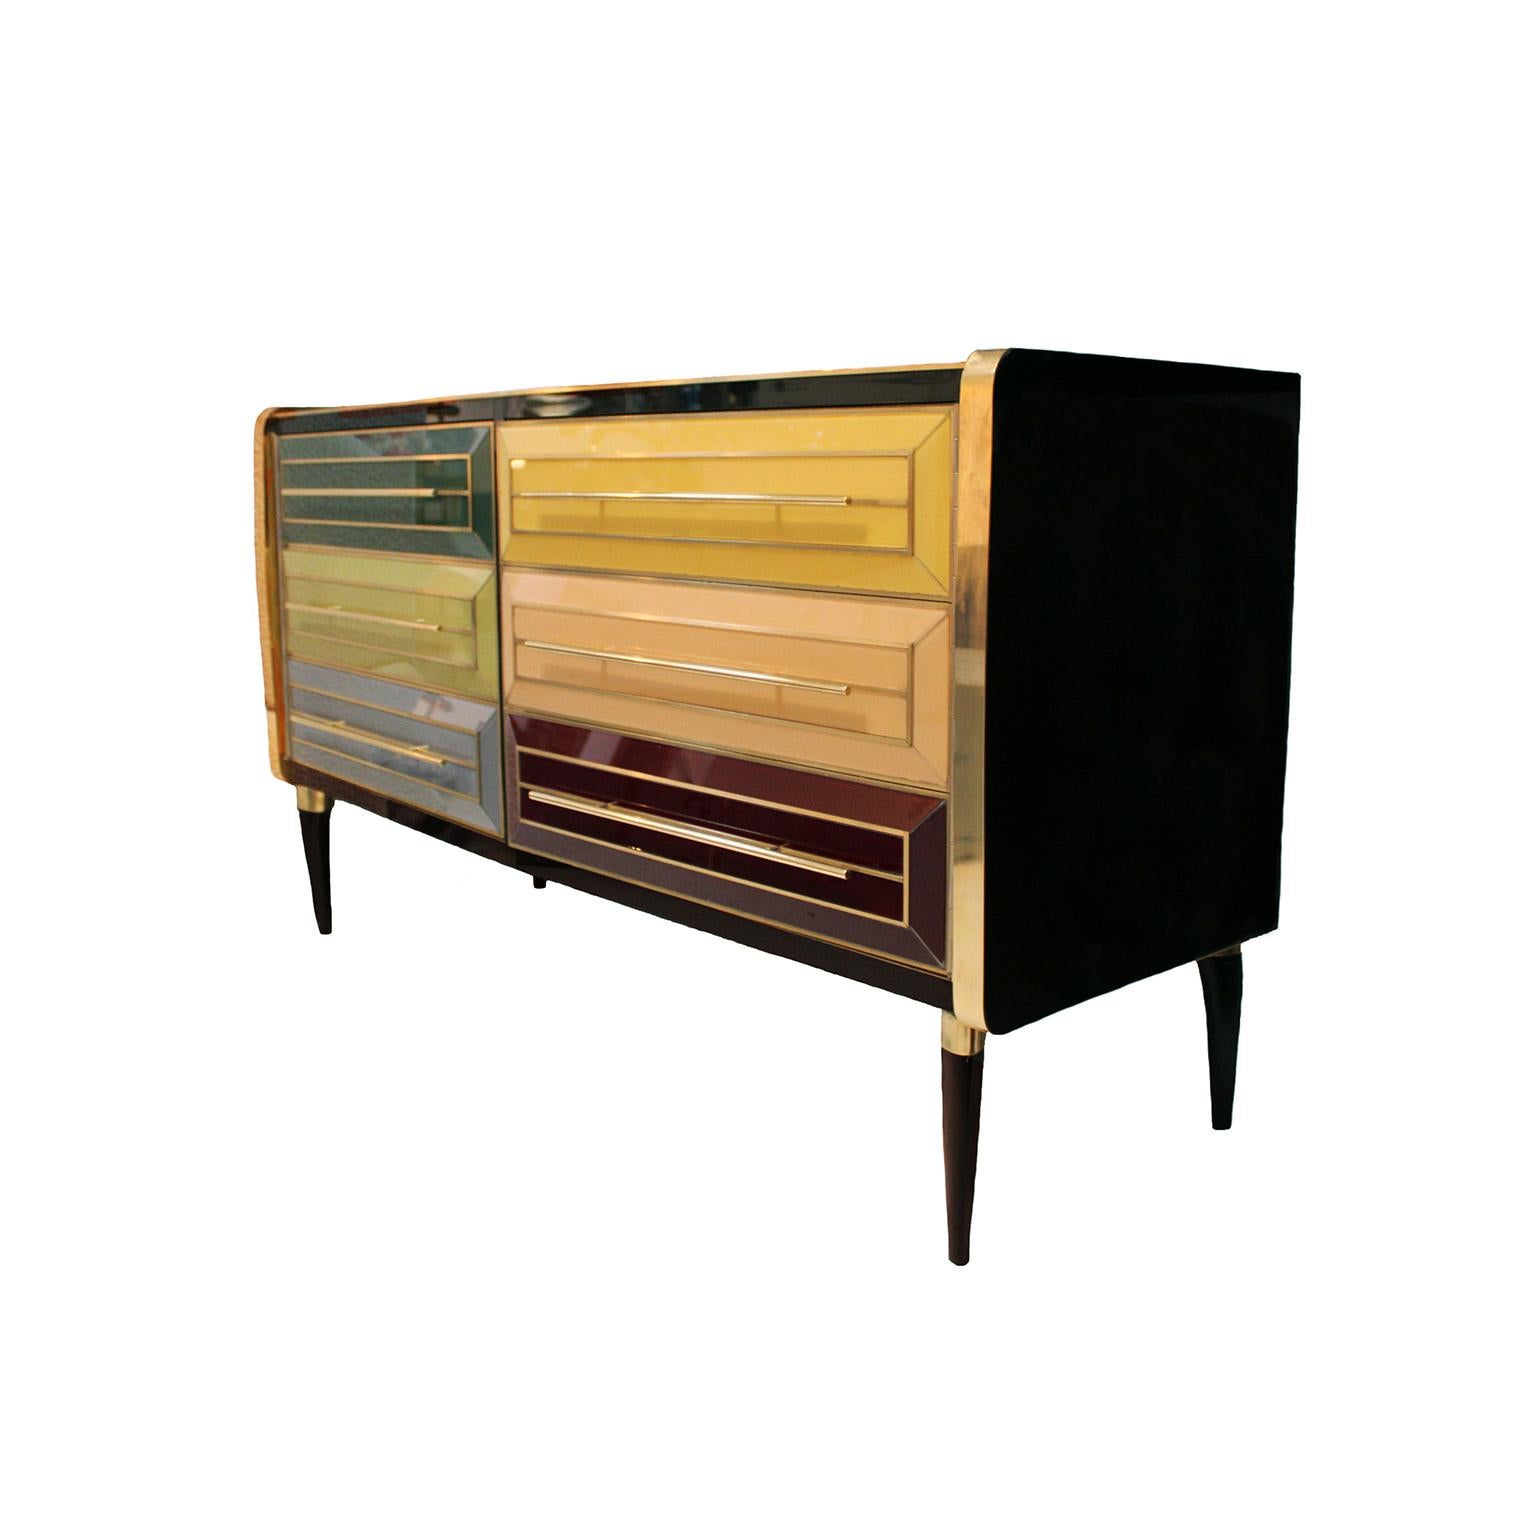 Italian Solid Wood And Colored Glass Bar Furniture, Italy 1950's For Sale